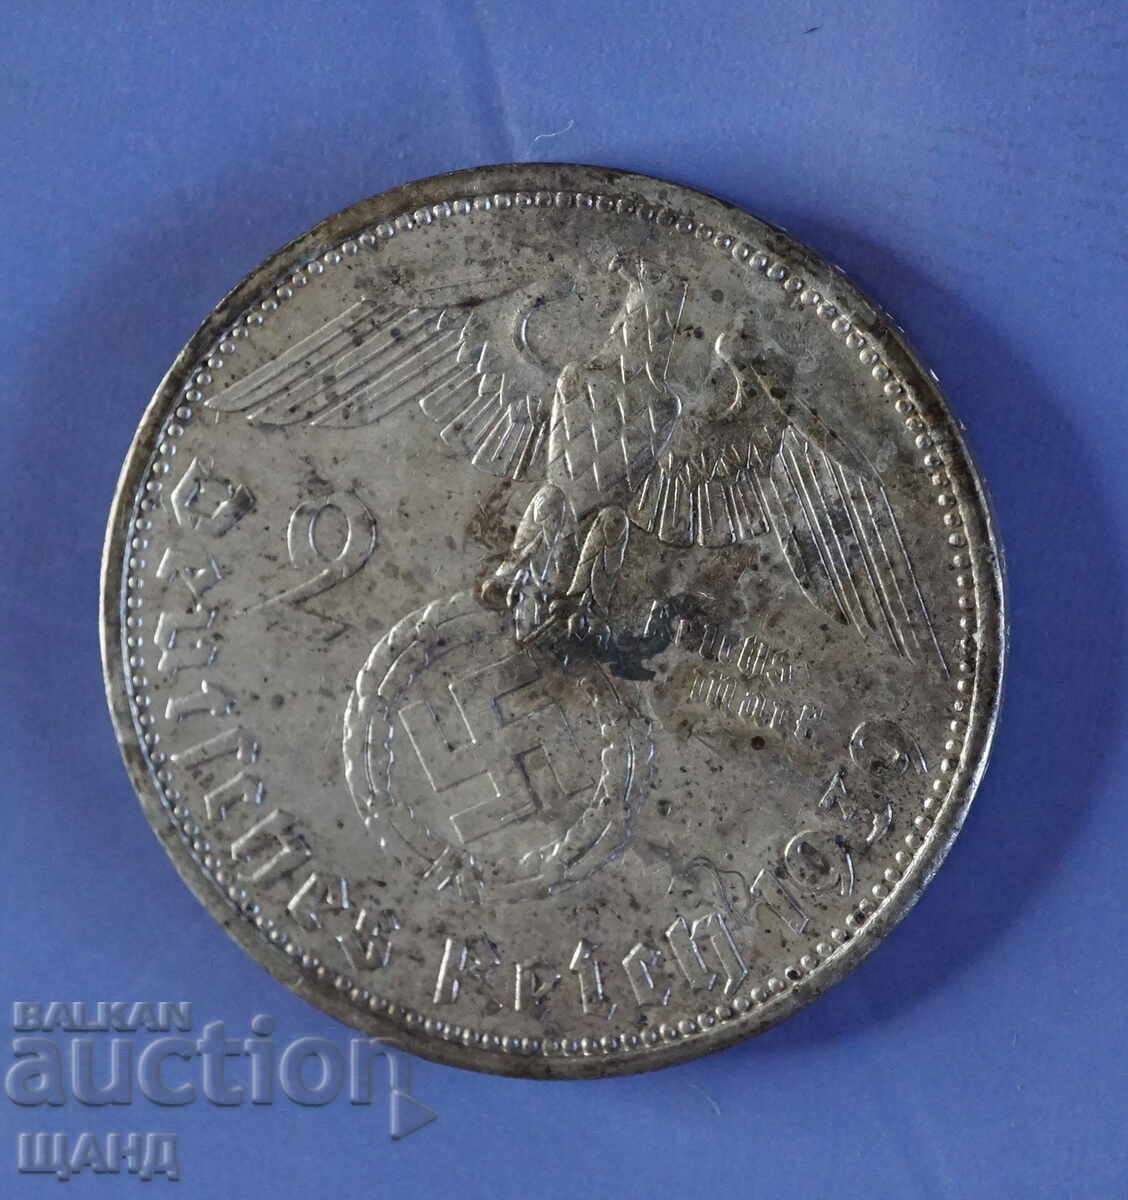 1939 Germany silver coin 2 marks